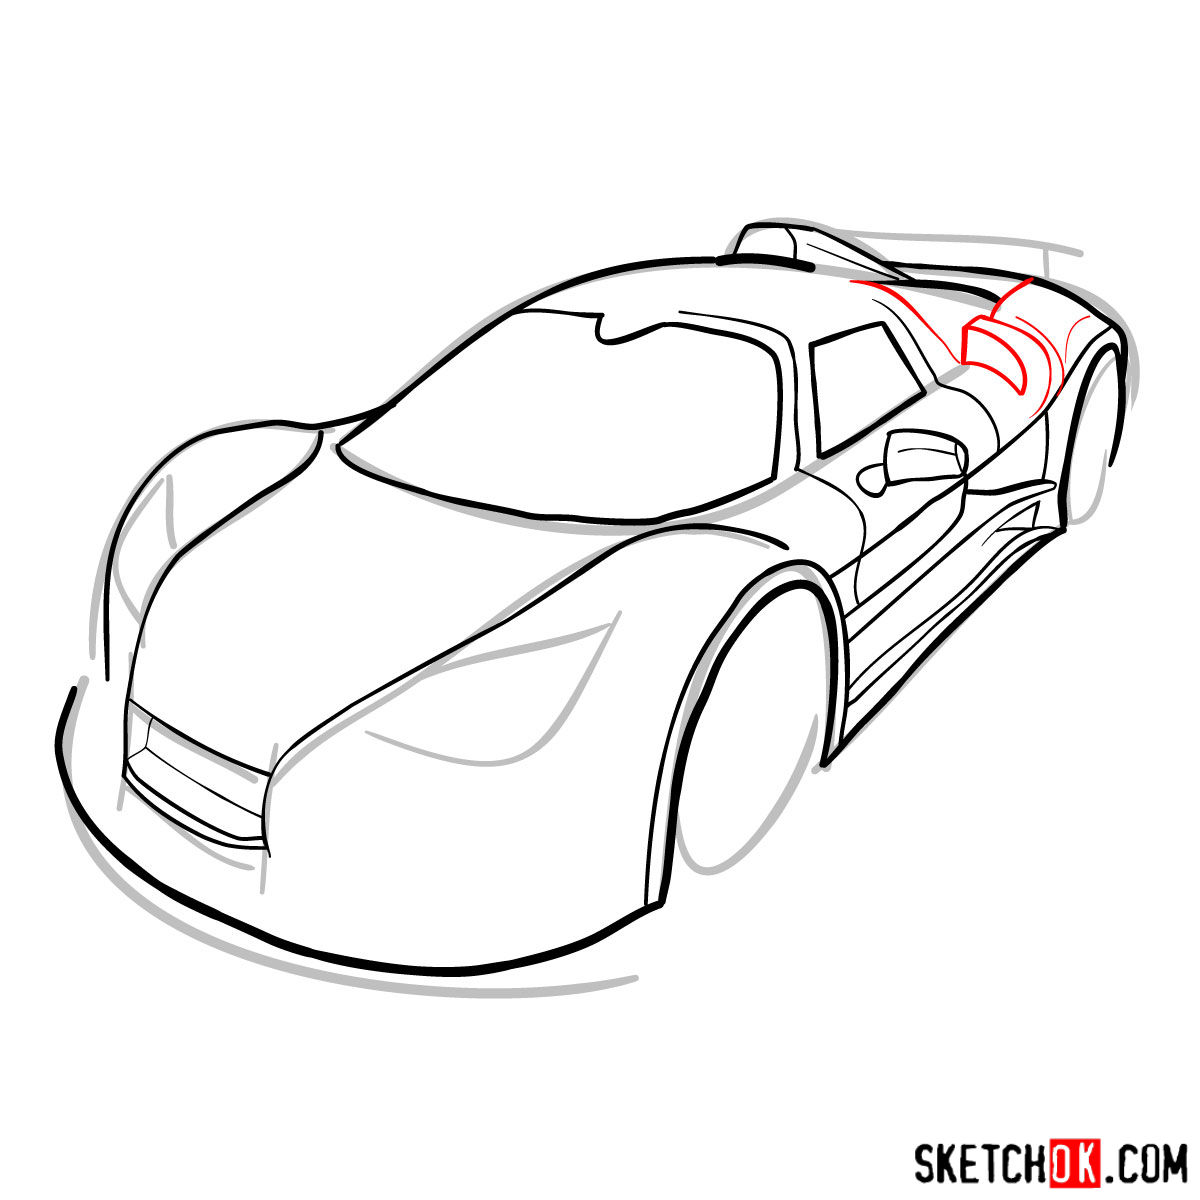 How to draw Gumpert Apolo Sport 2012 - step 08